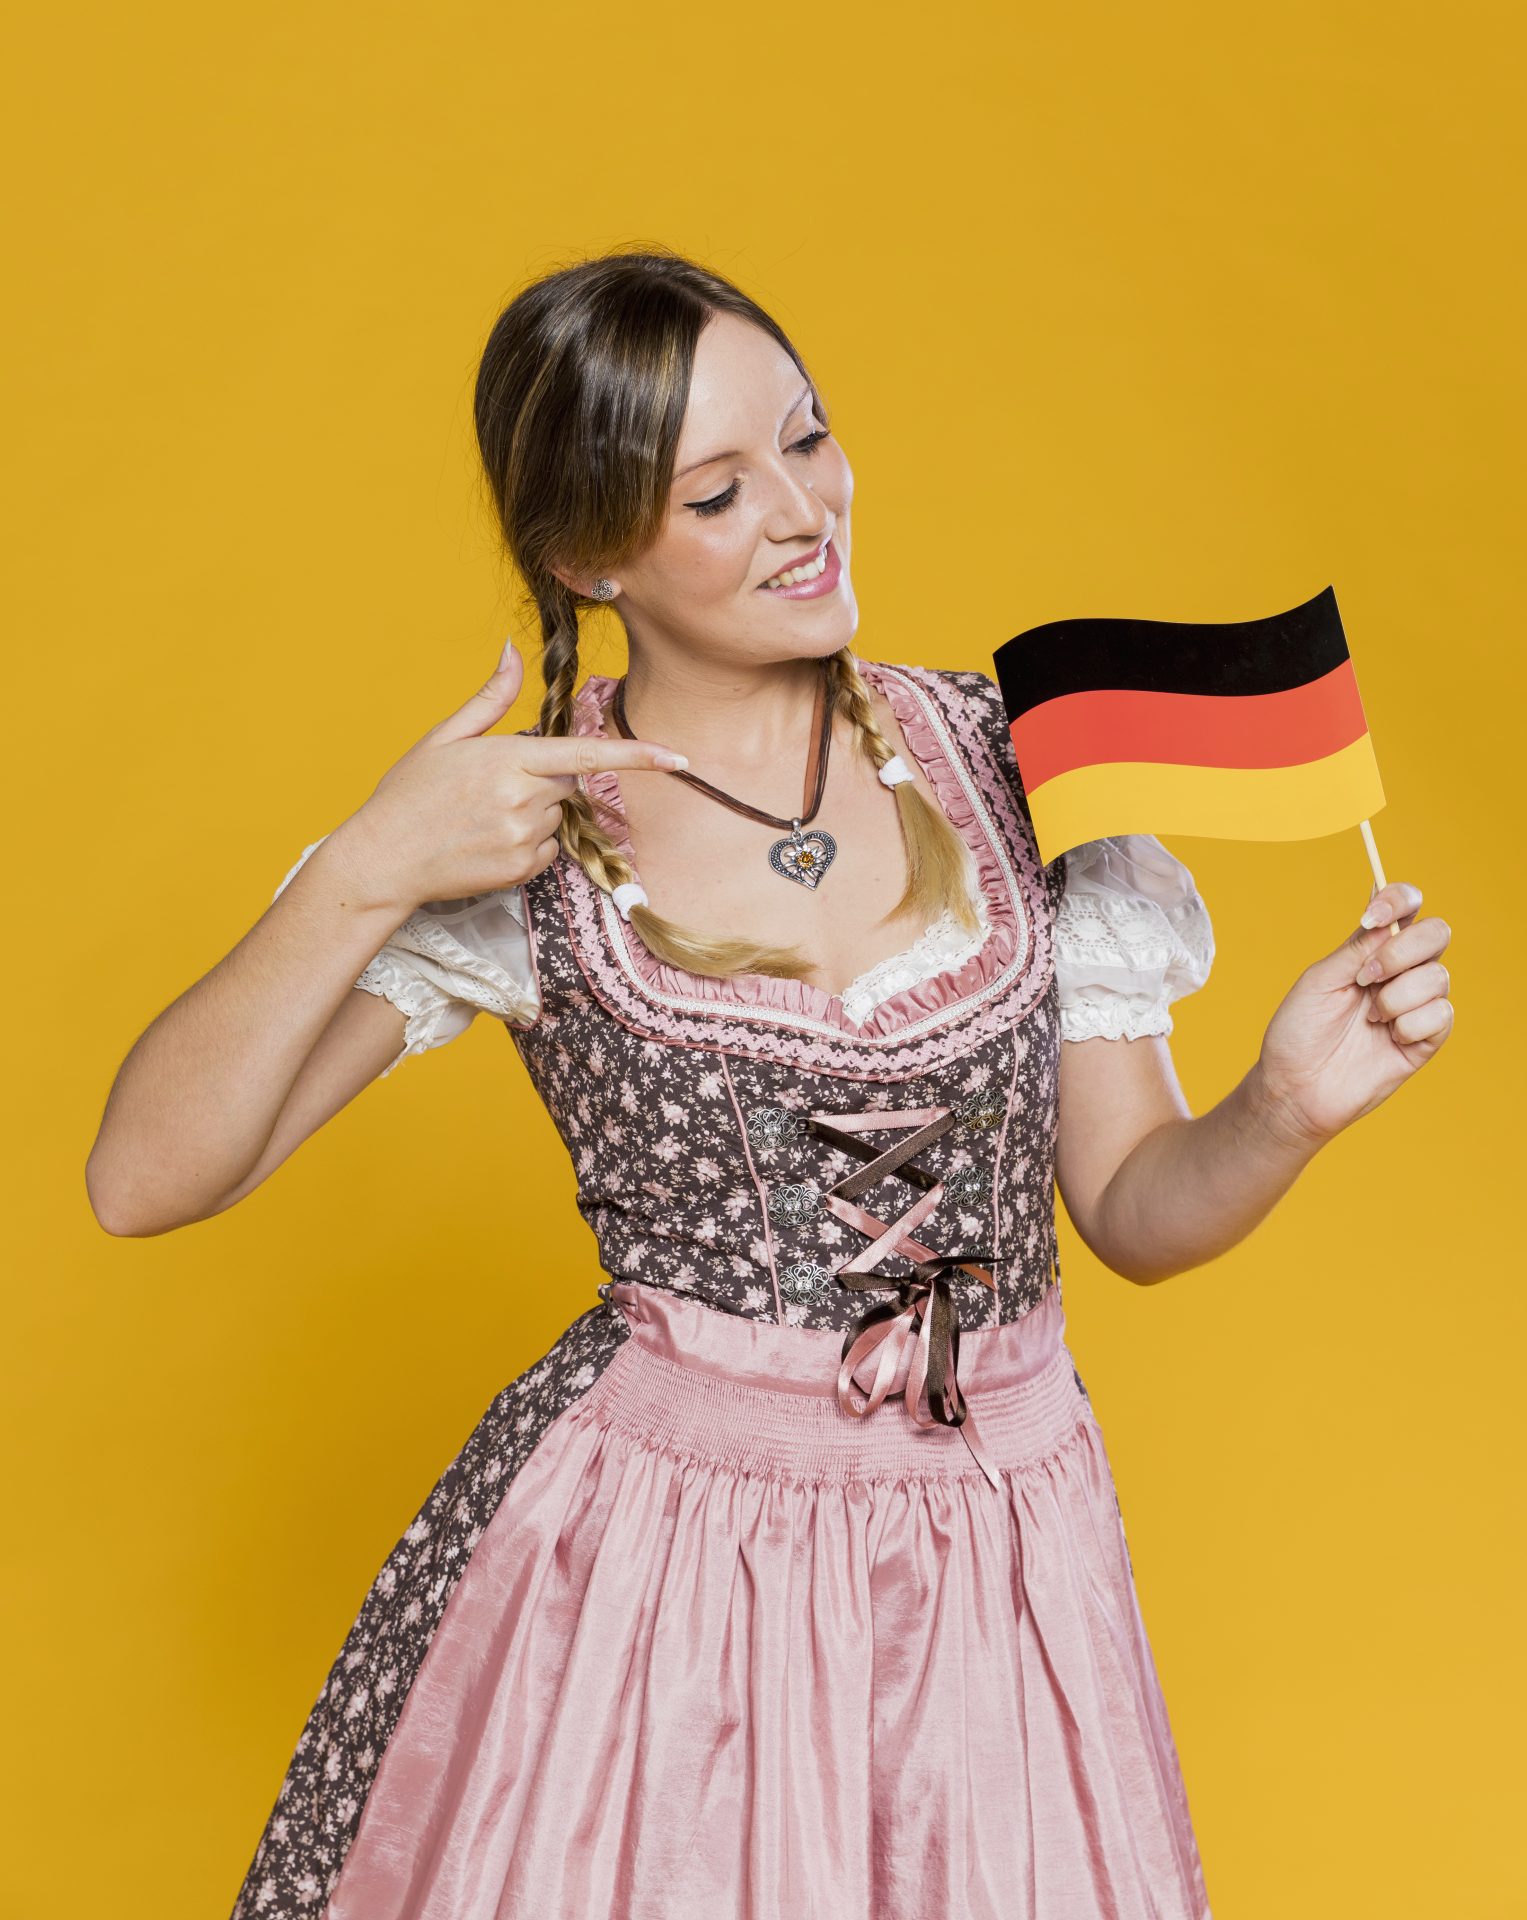 german language course A1 in english for free